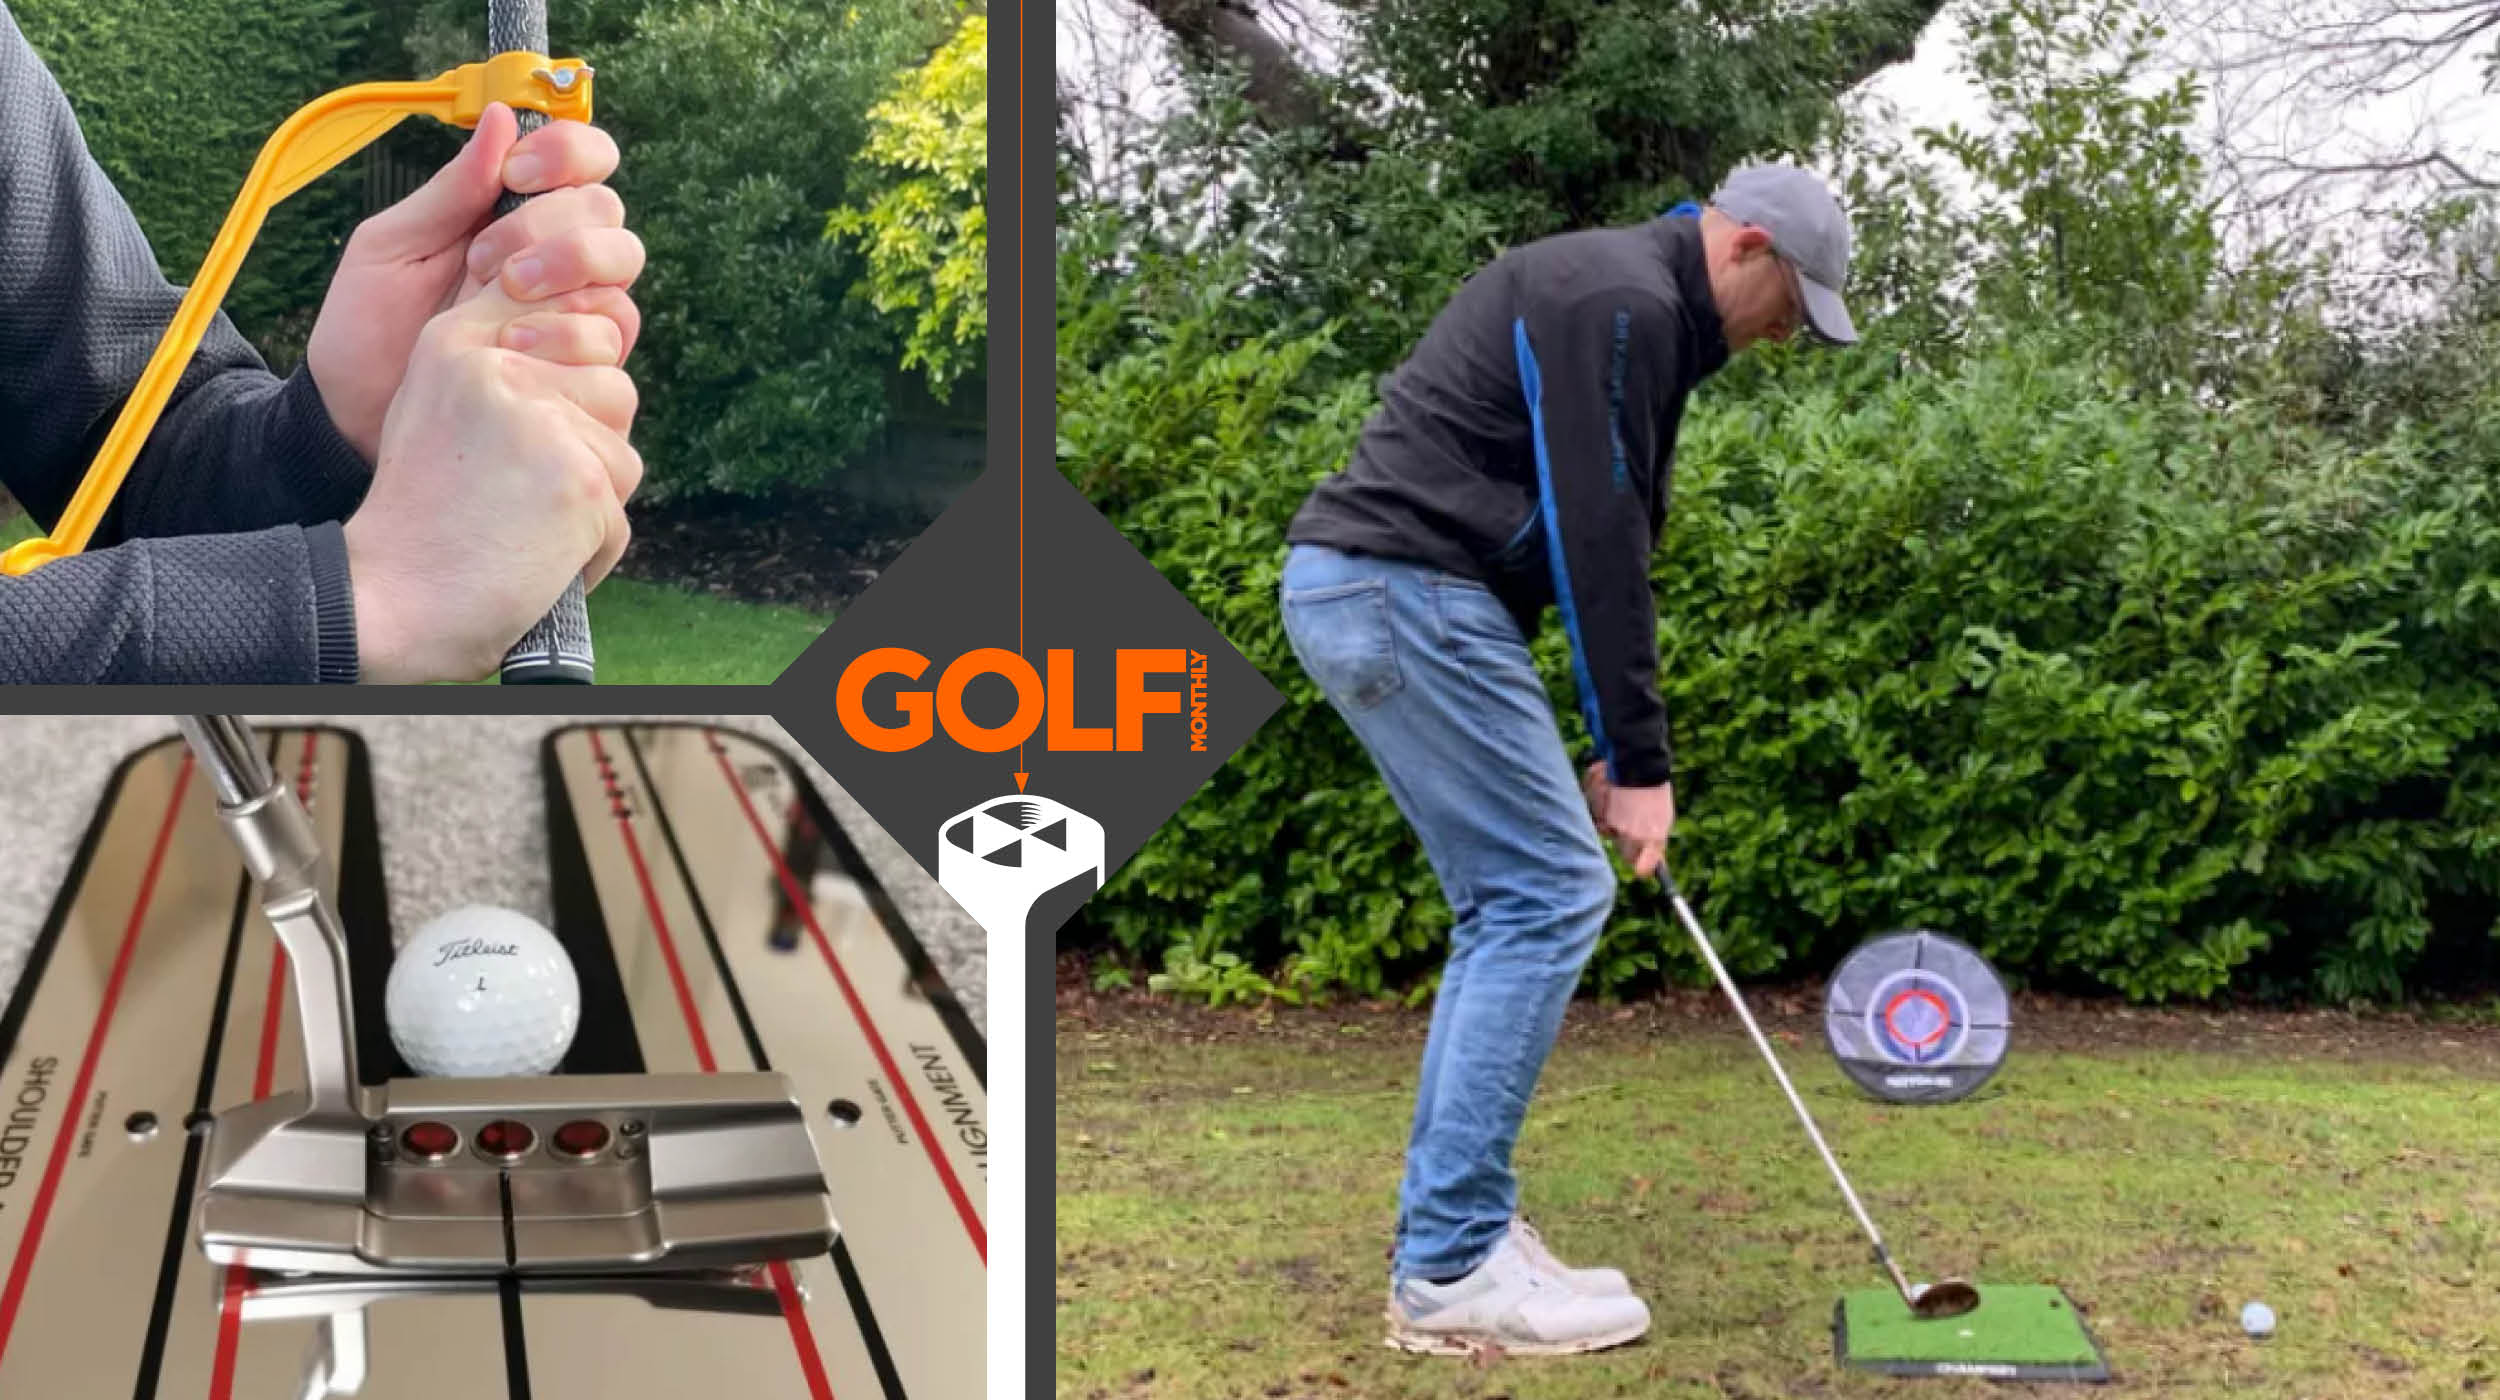 10 Best Golf Training Aids On Amazon - We Test Them Out! | Golf 